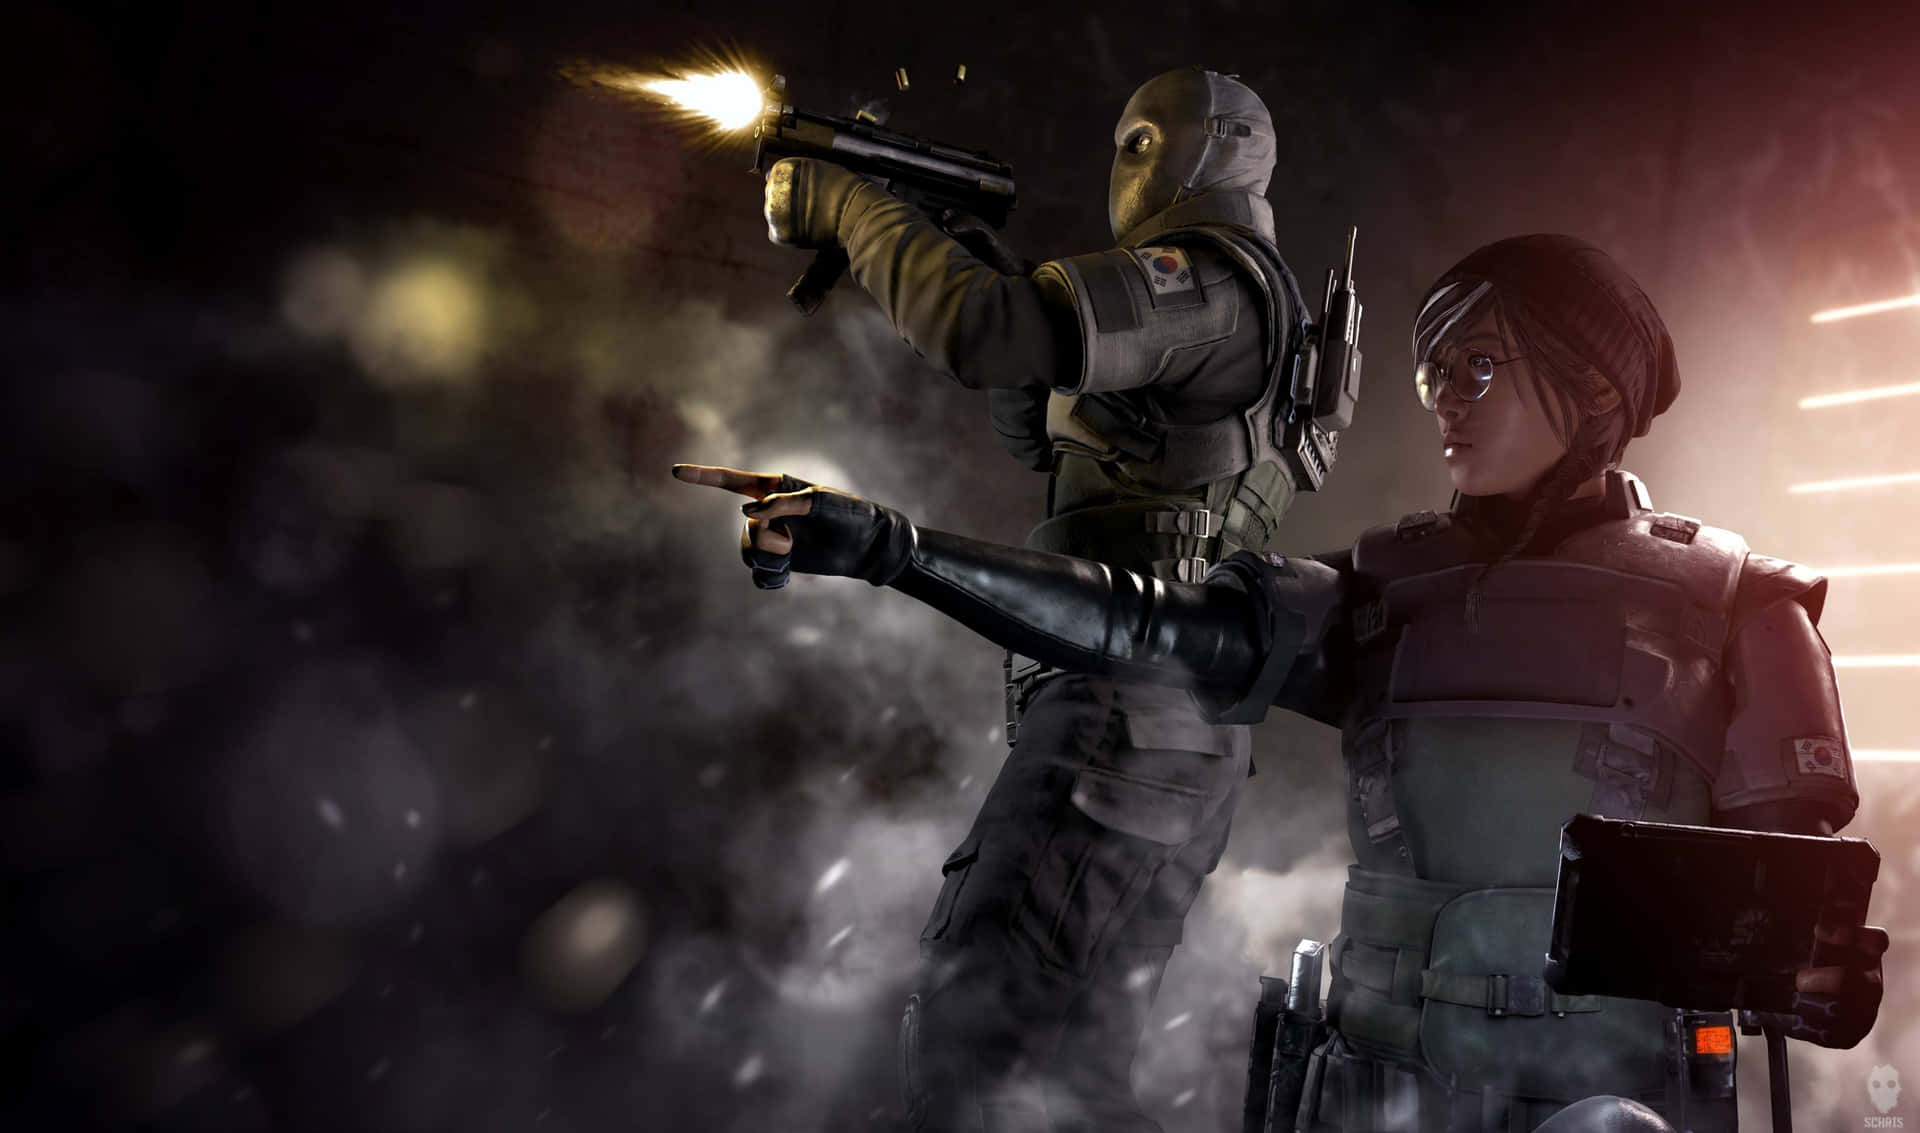 Get ready for intense tactical warfare with Rainbow Six Siege